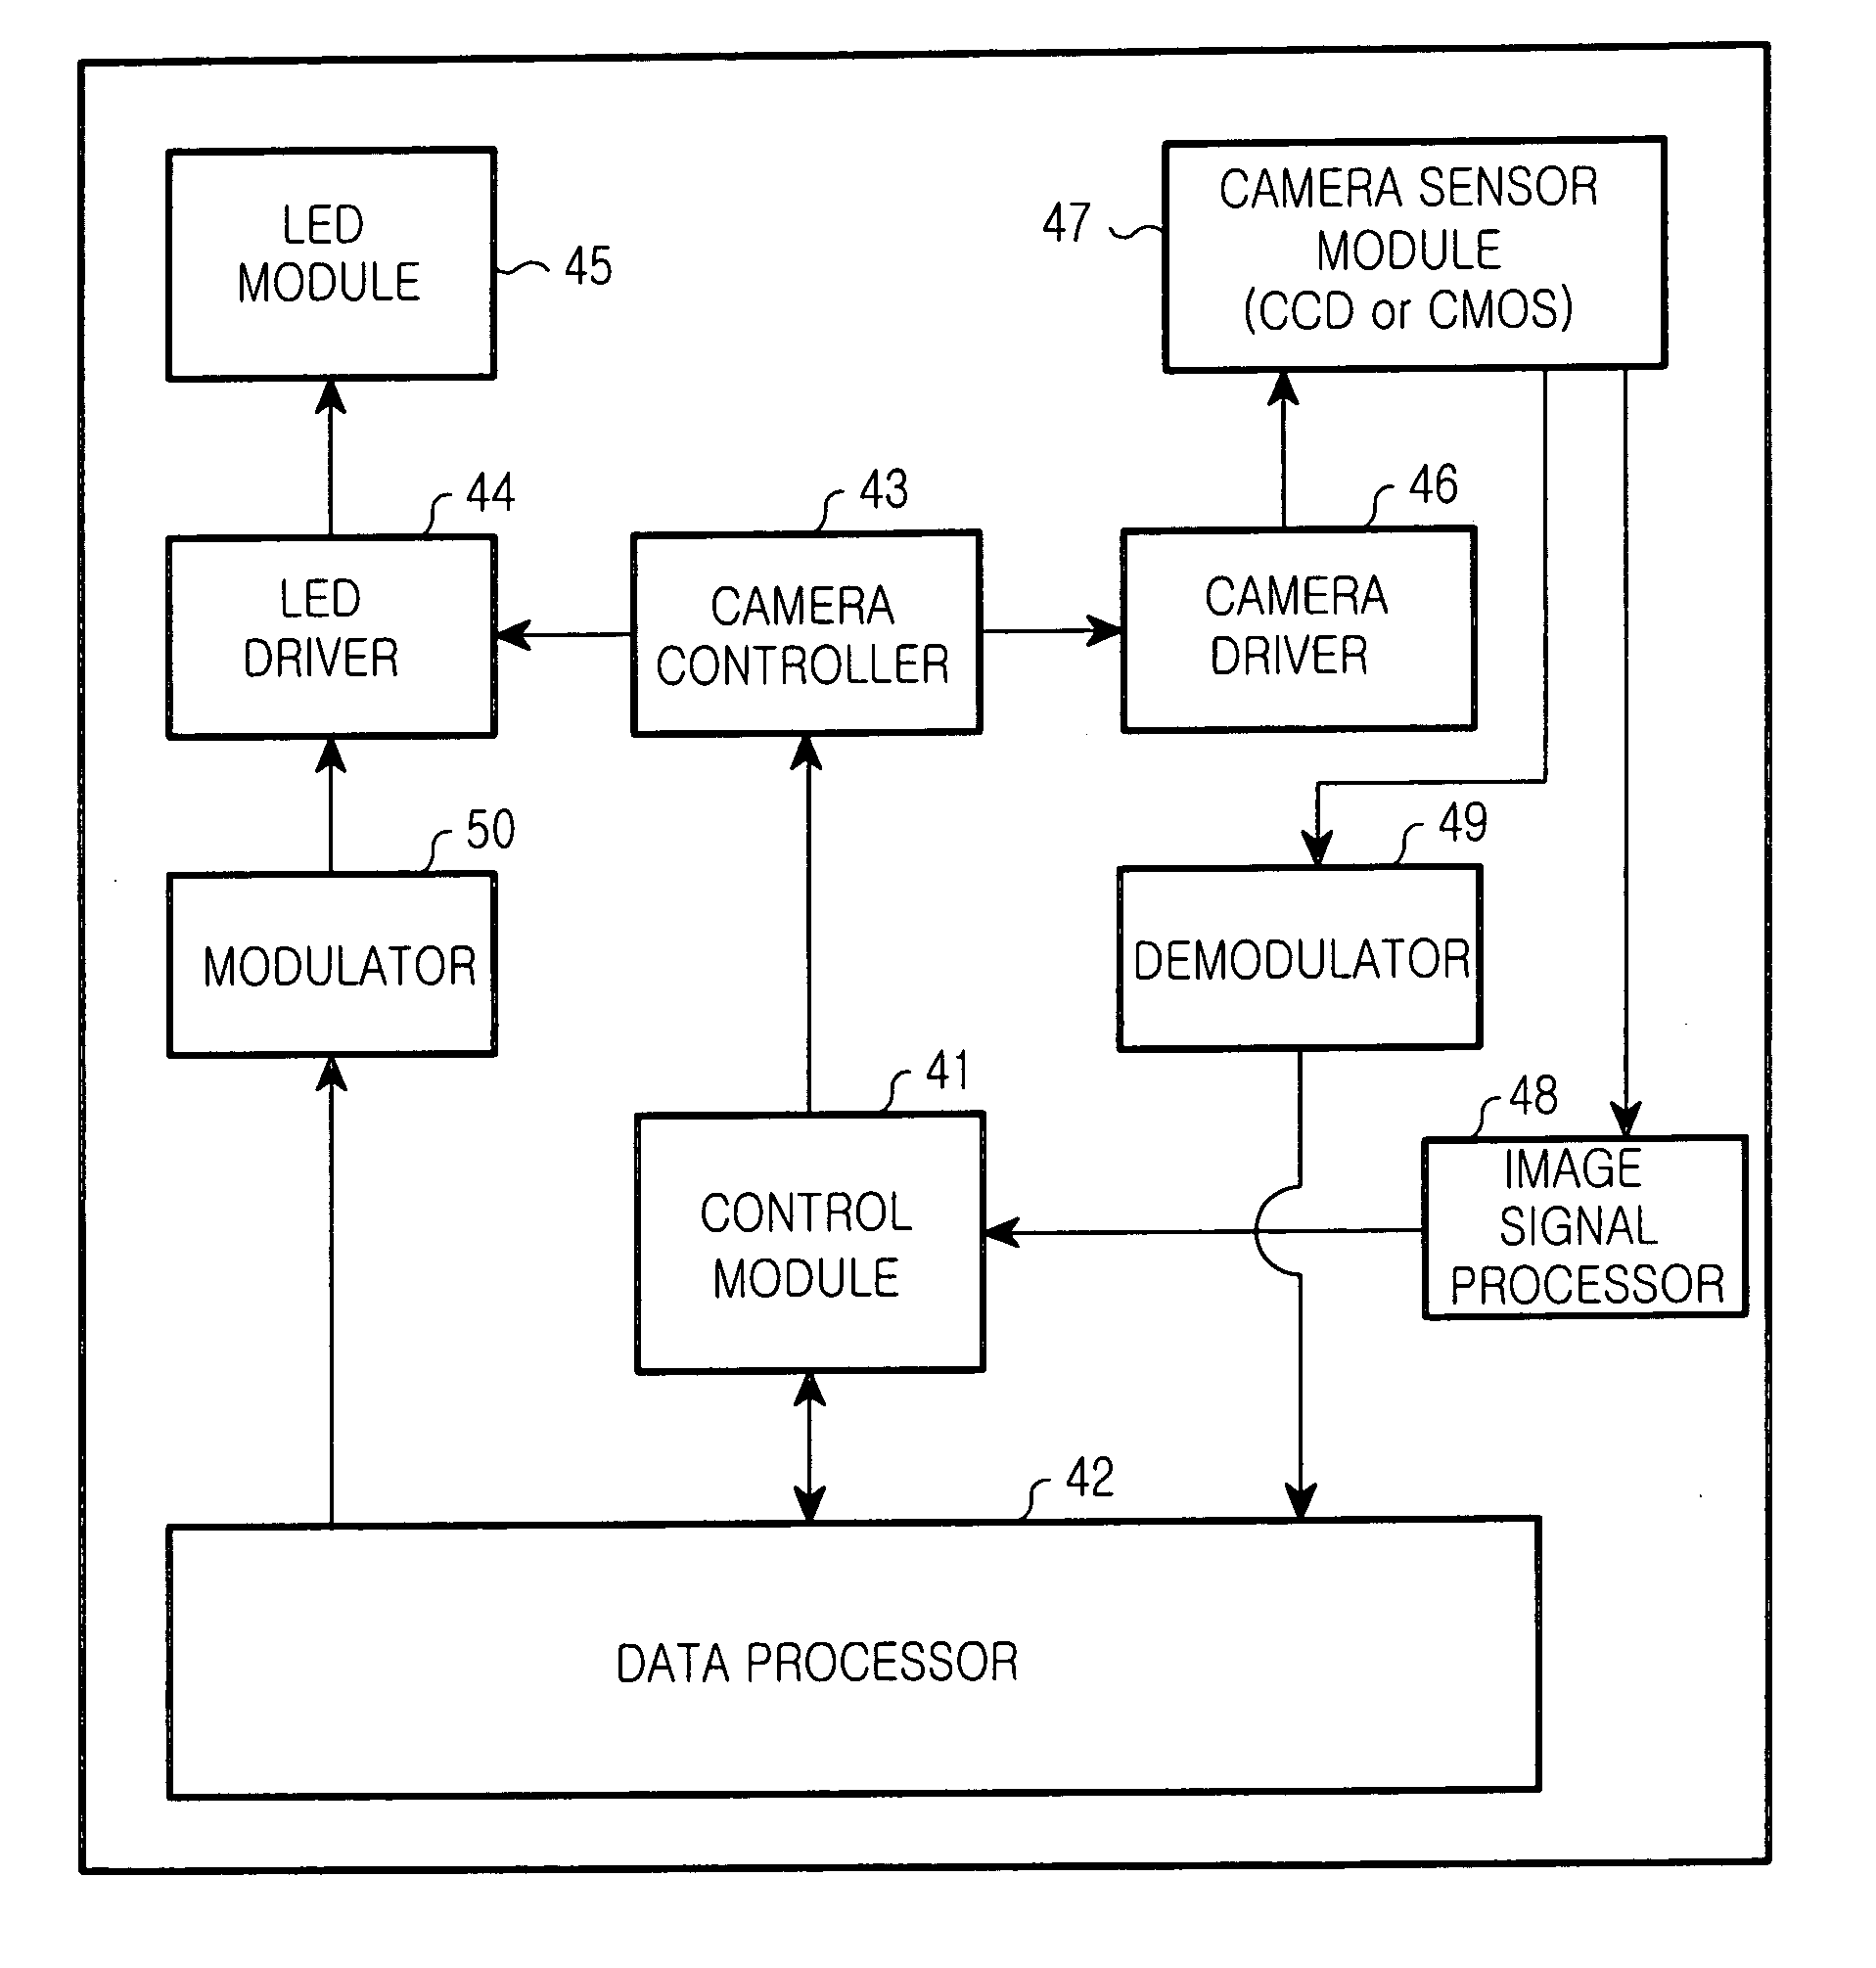 Wireless terminal for carrying out visible light short-range communication using camera device